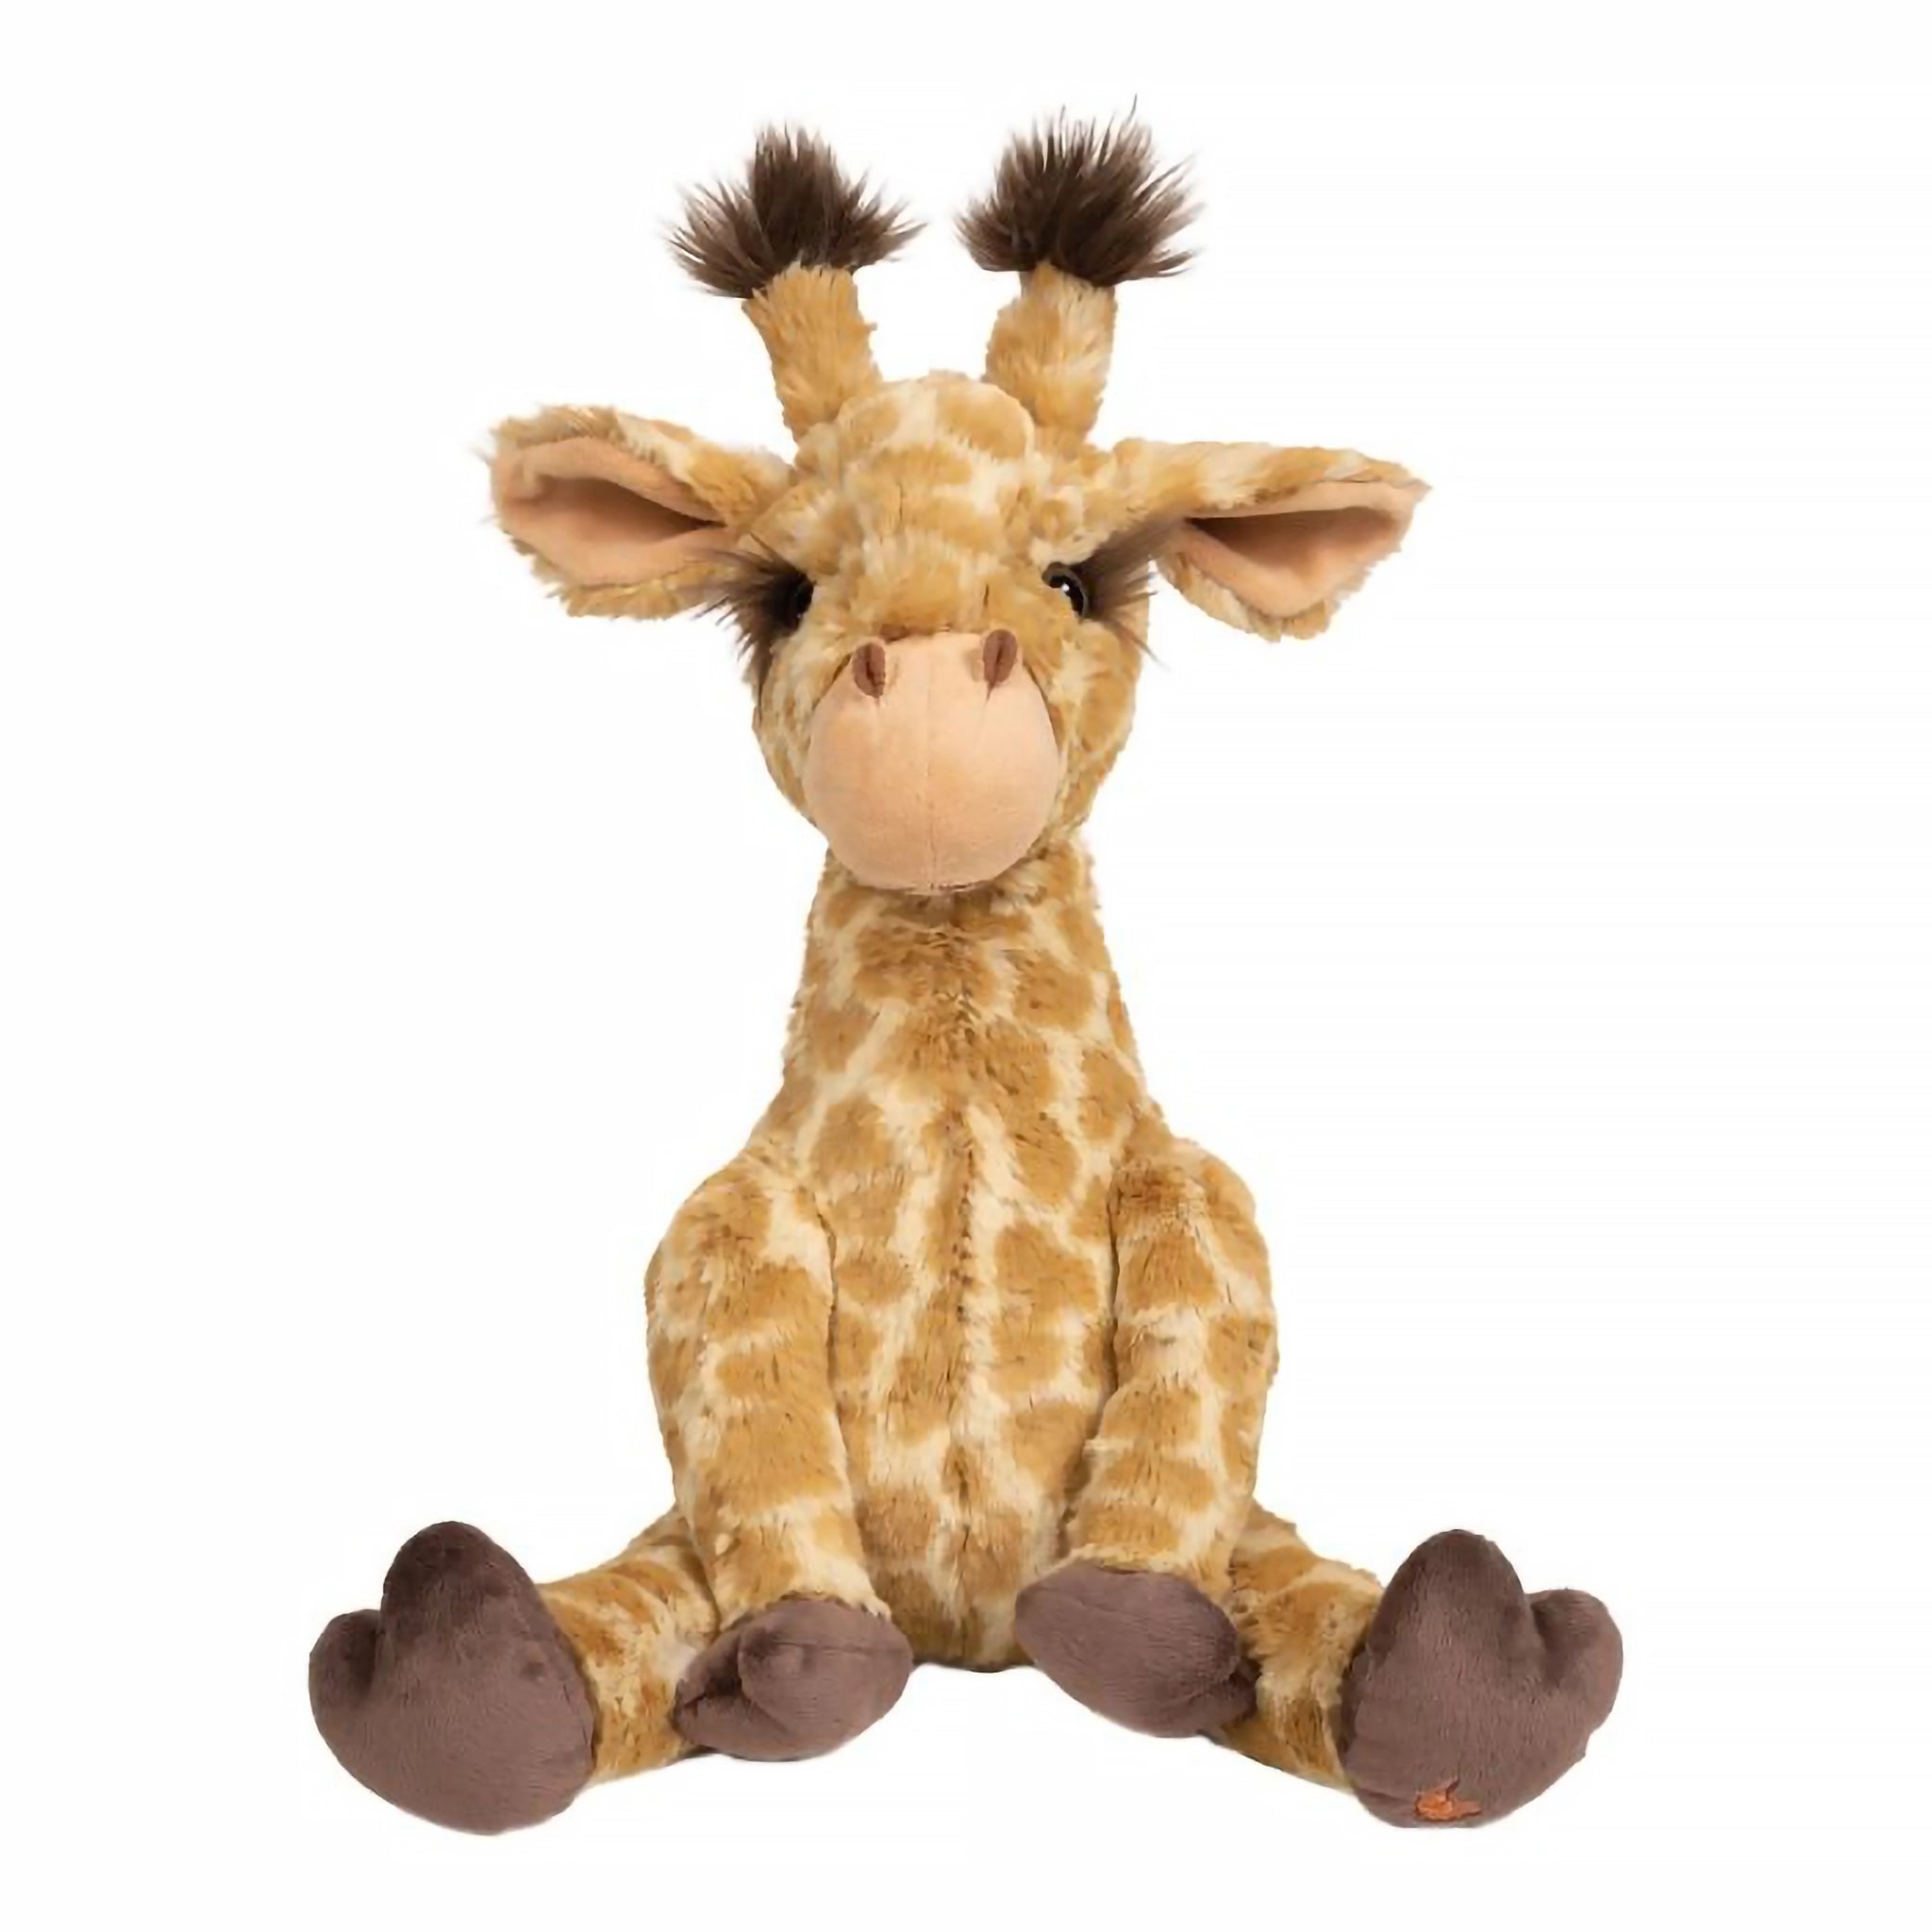 A stuffed giraffe plush toy with the Wrendale logo embroidered on the bottom of its foot